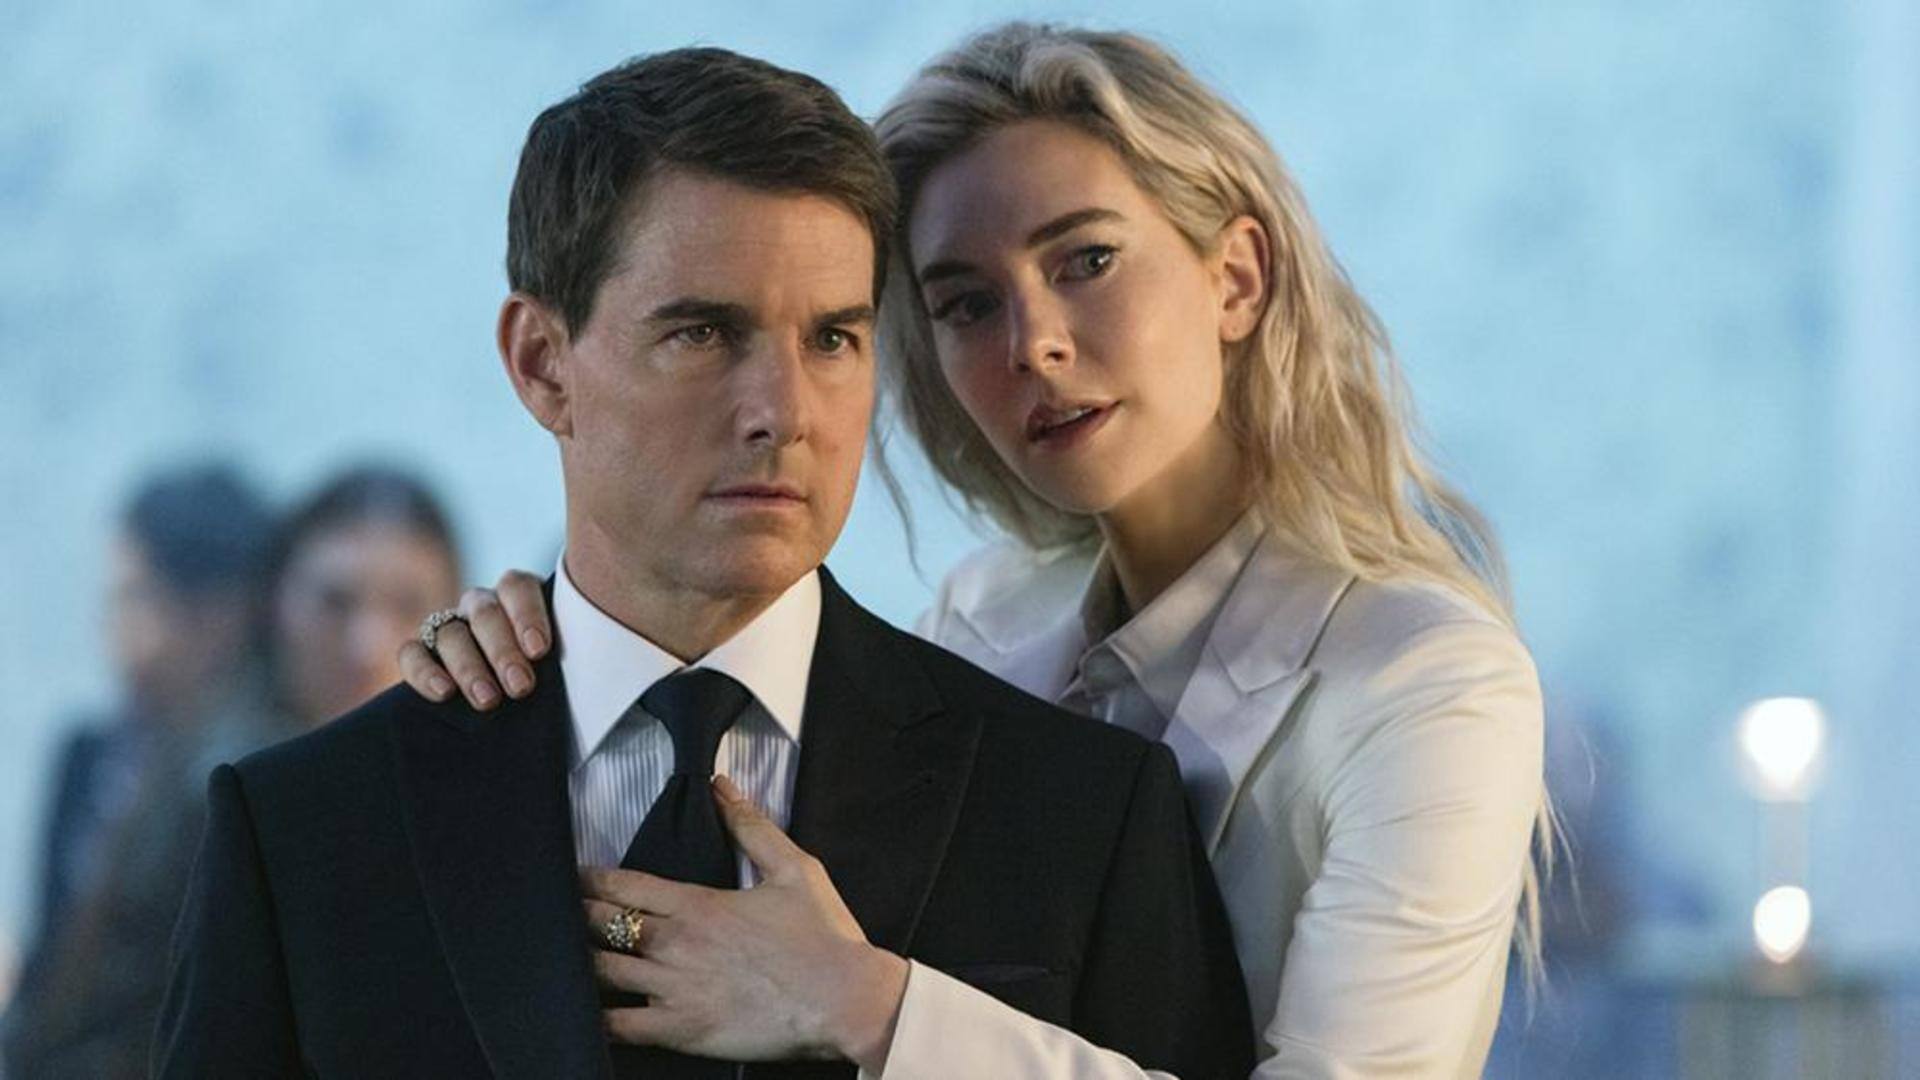 #BoxOfficeCollection: 'Mission: Impossible 7' is gaining momentum